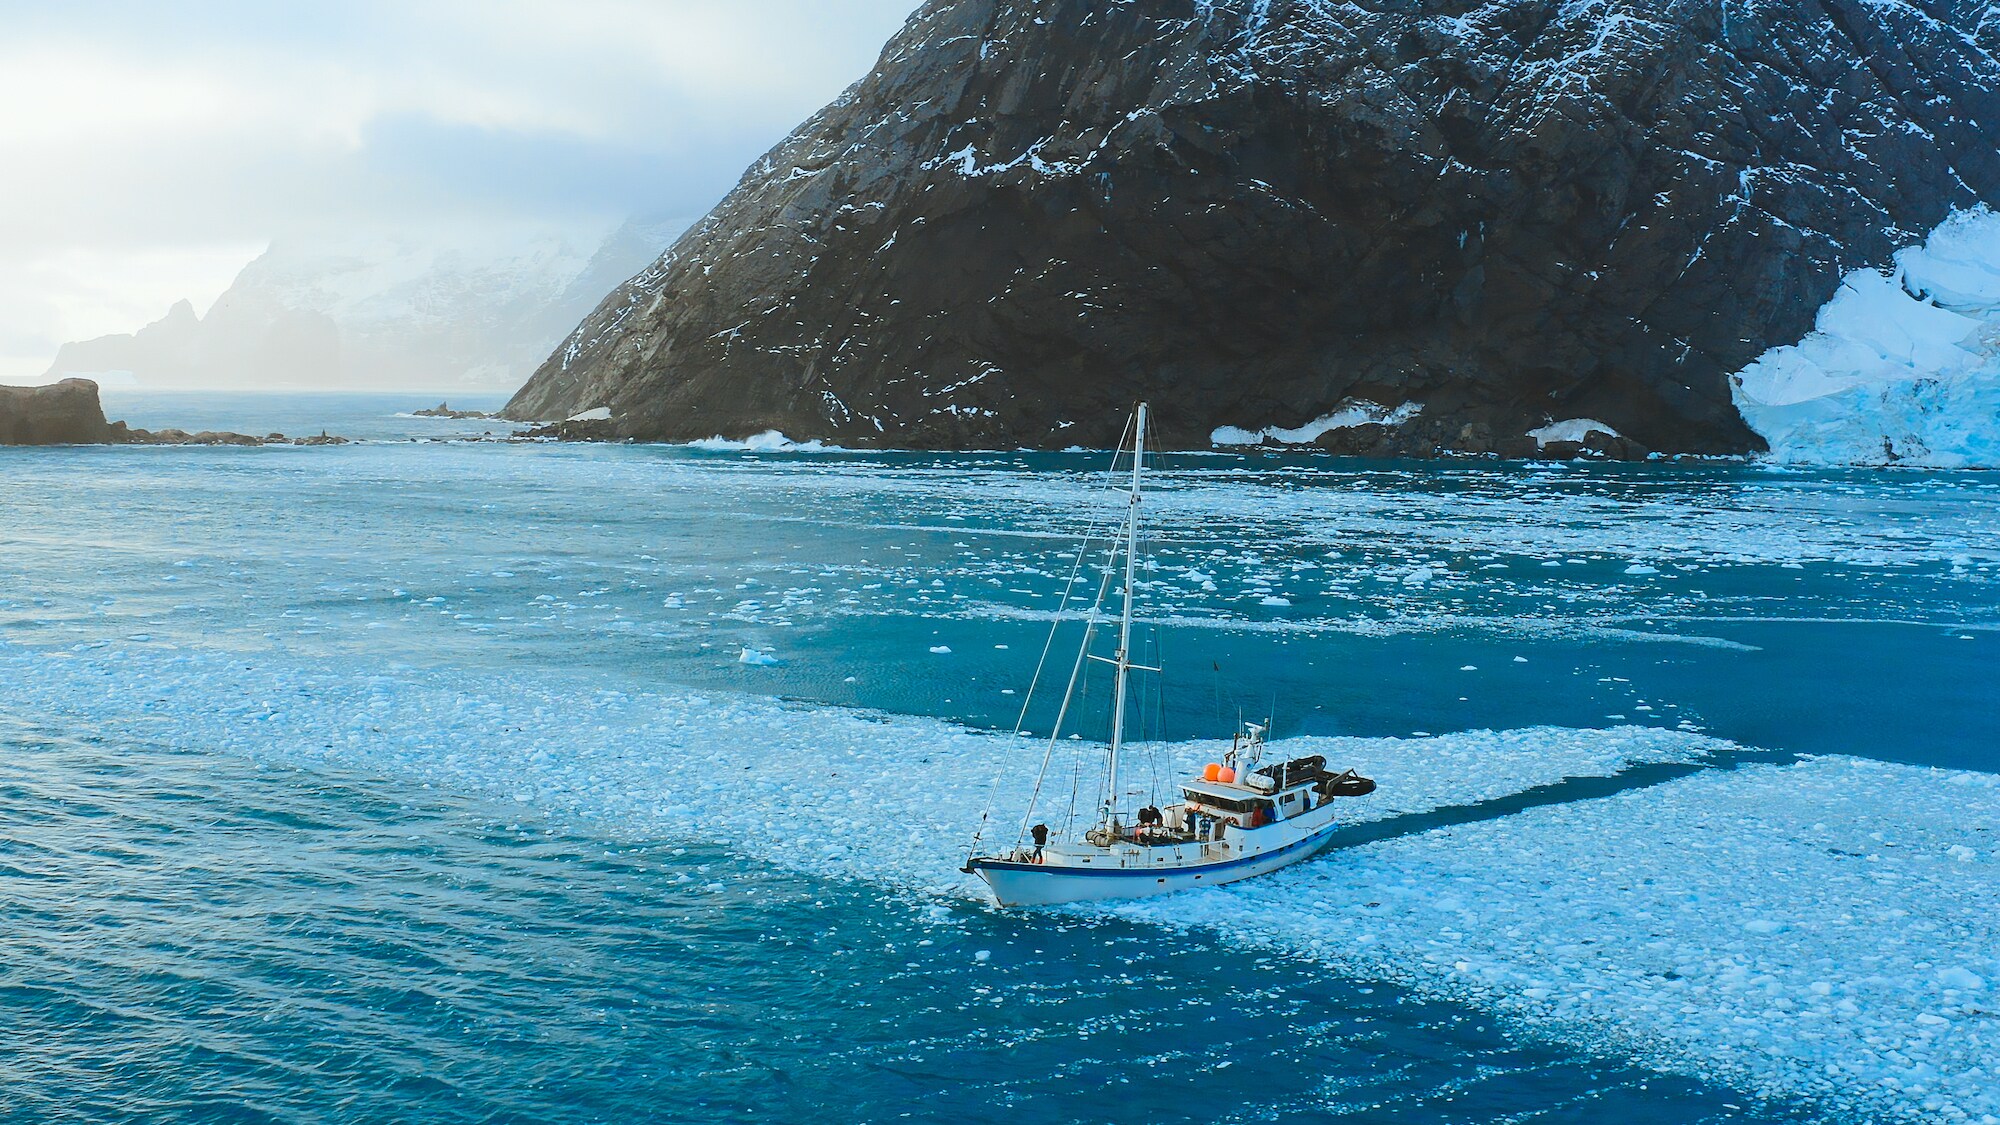 The Australis pushes out to sea to look for whales from an anchorage at Point Wild, Elephant Island. (Credit: National Geographic/Bertie Gregory for Disney+)